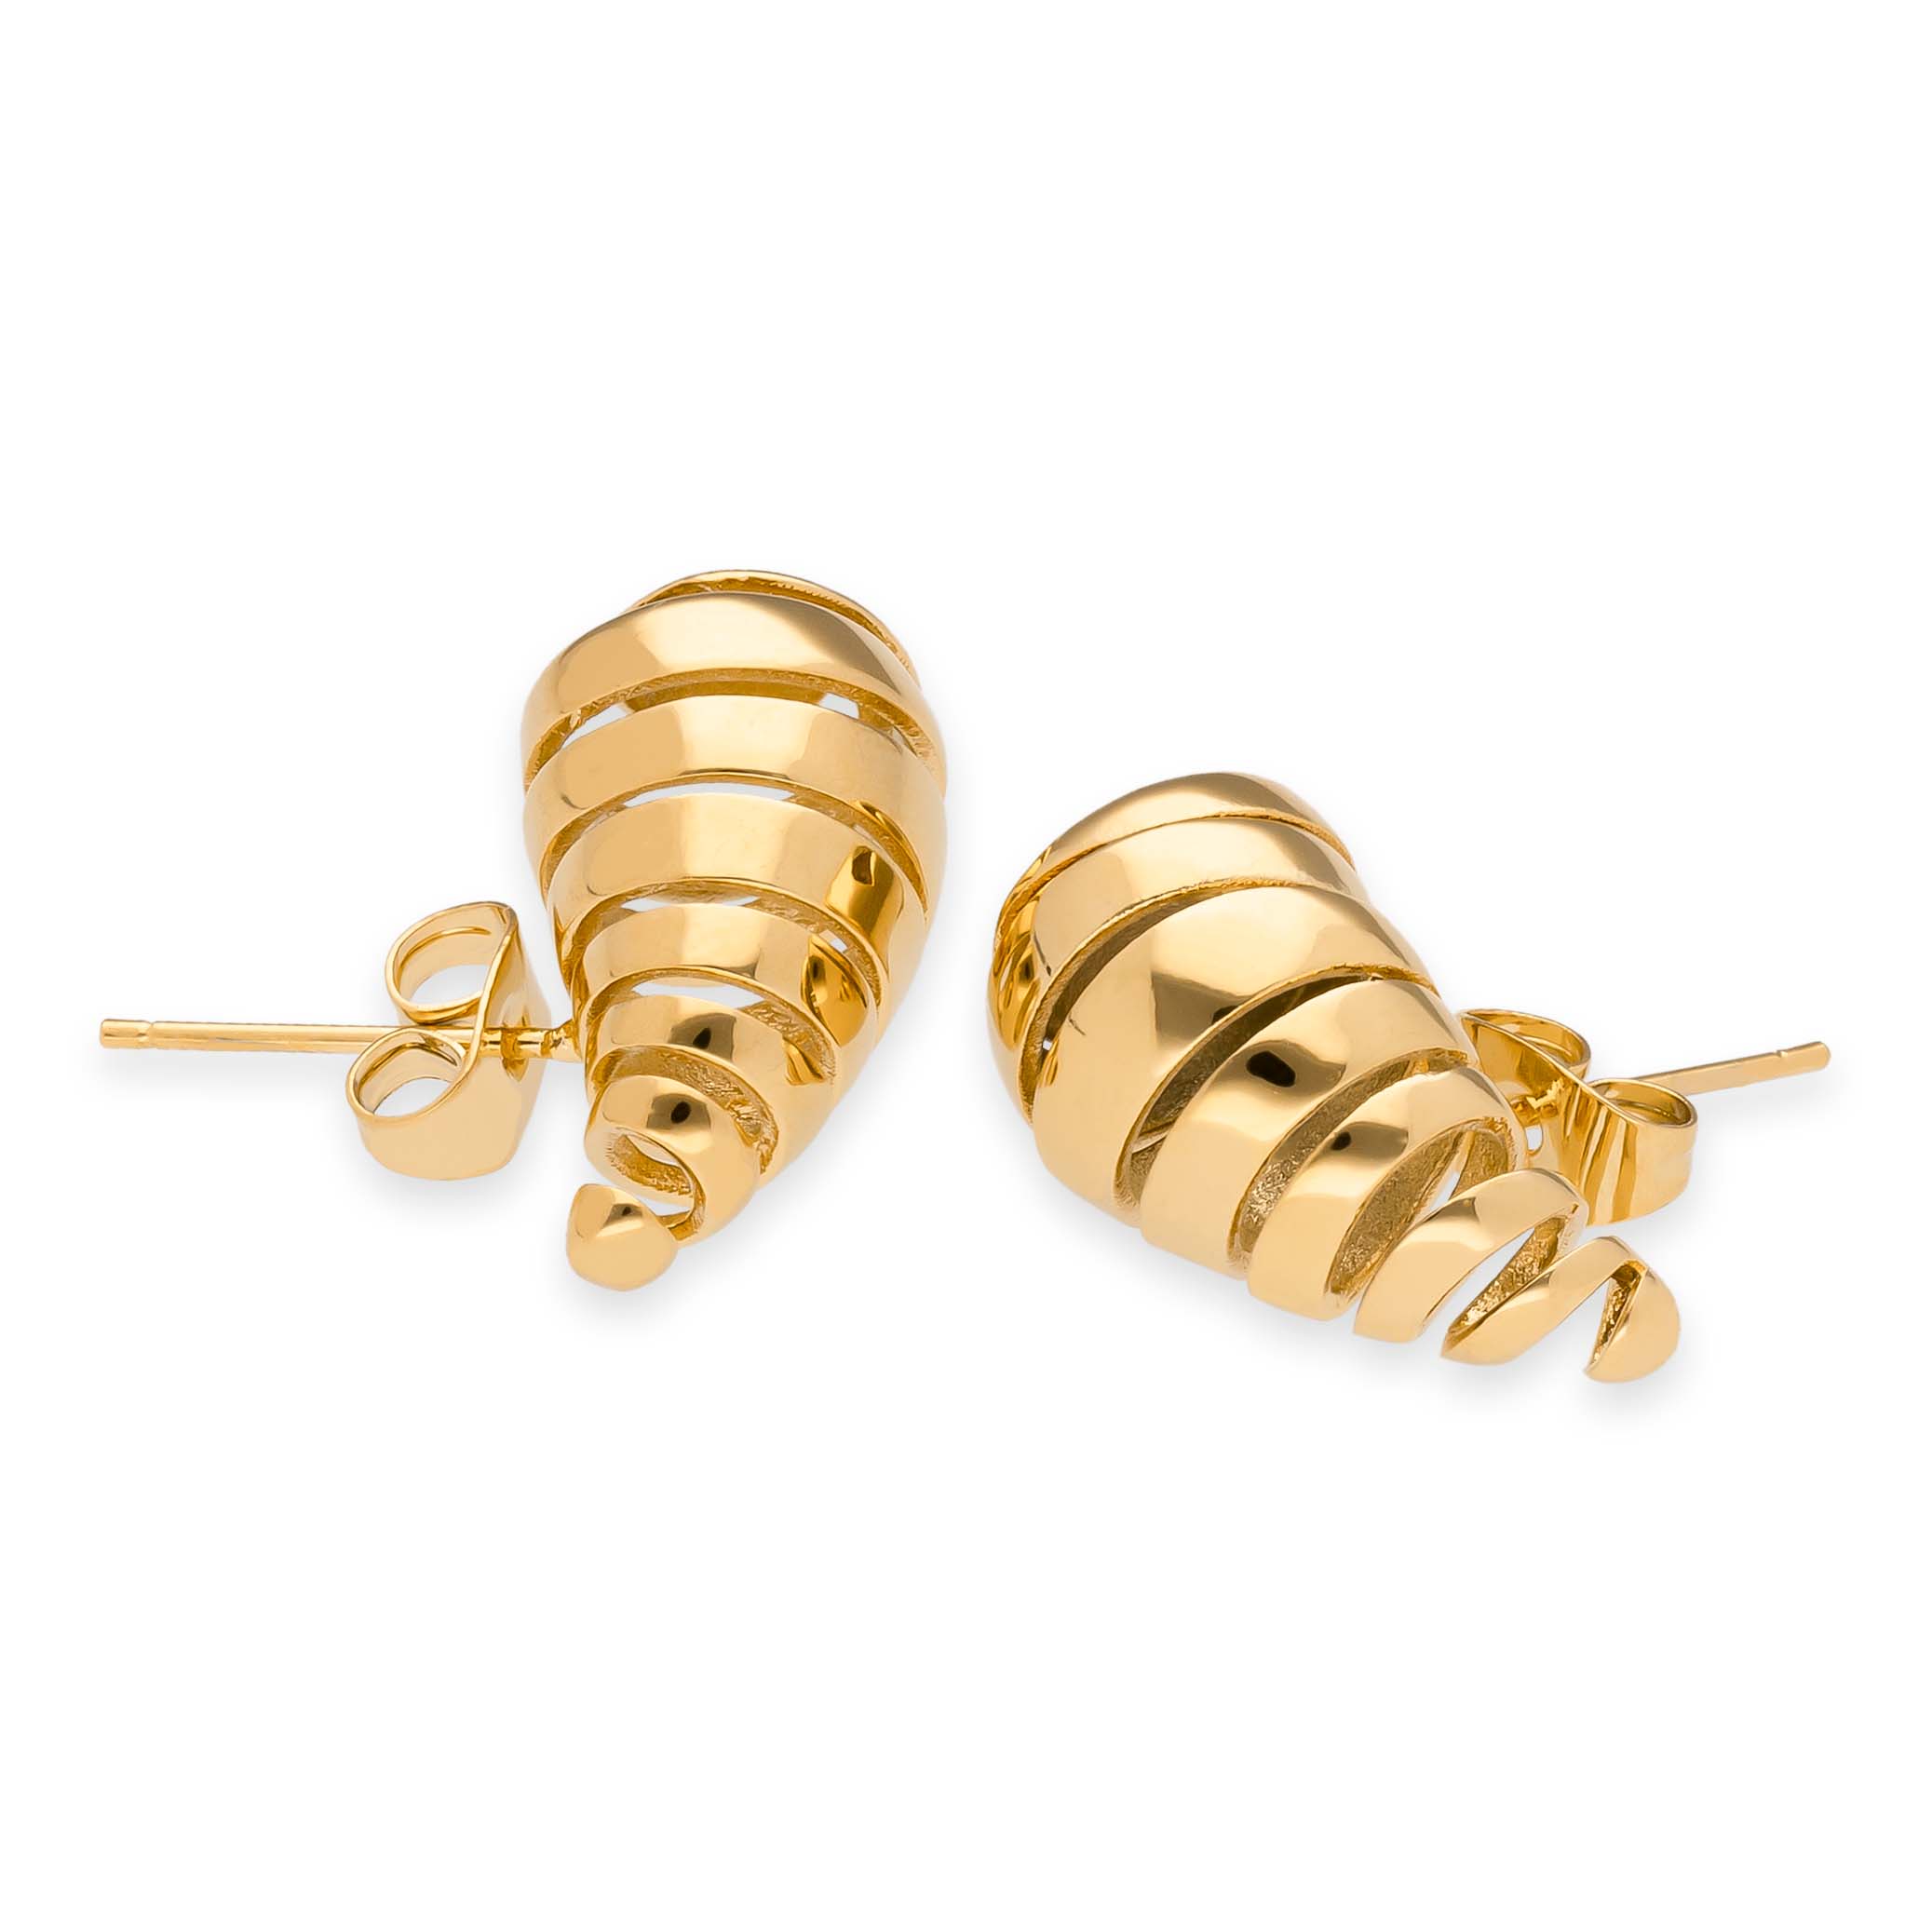 Curled drop earrings gold